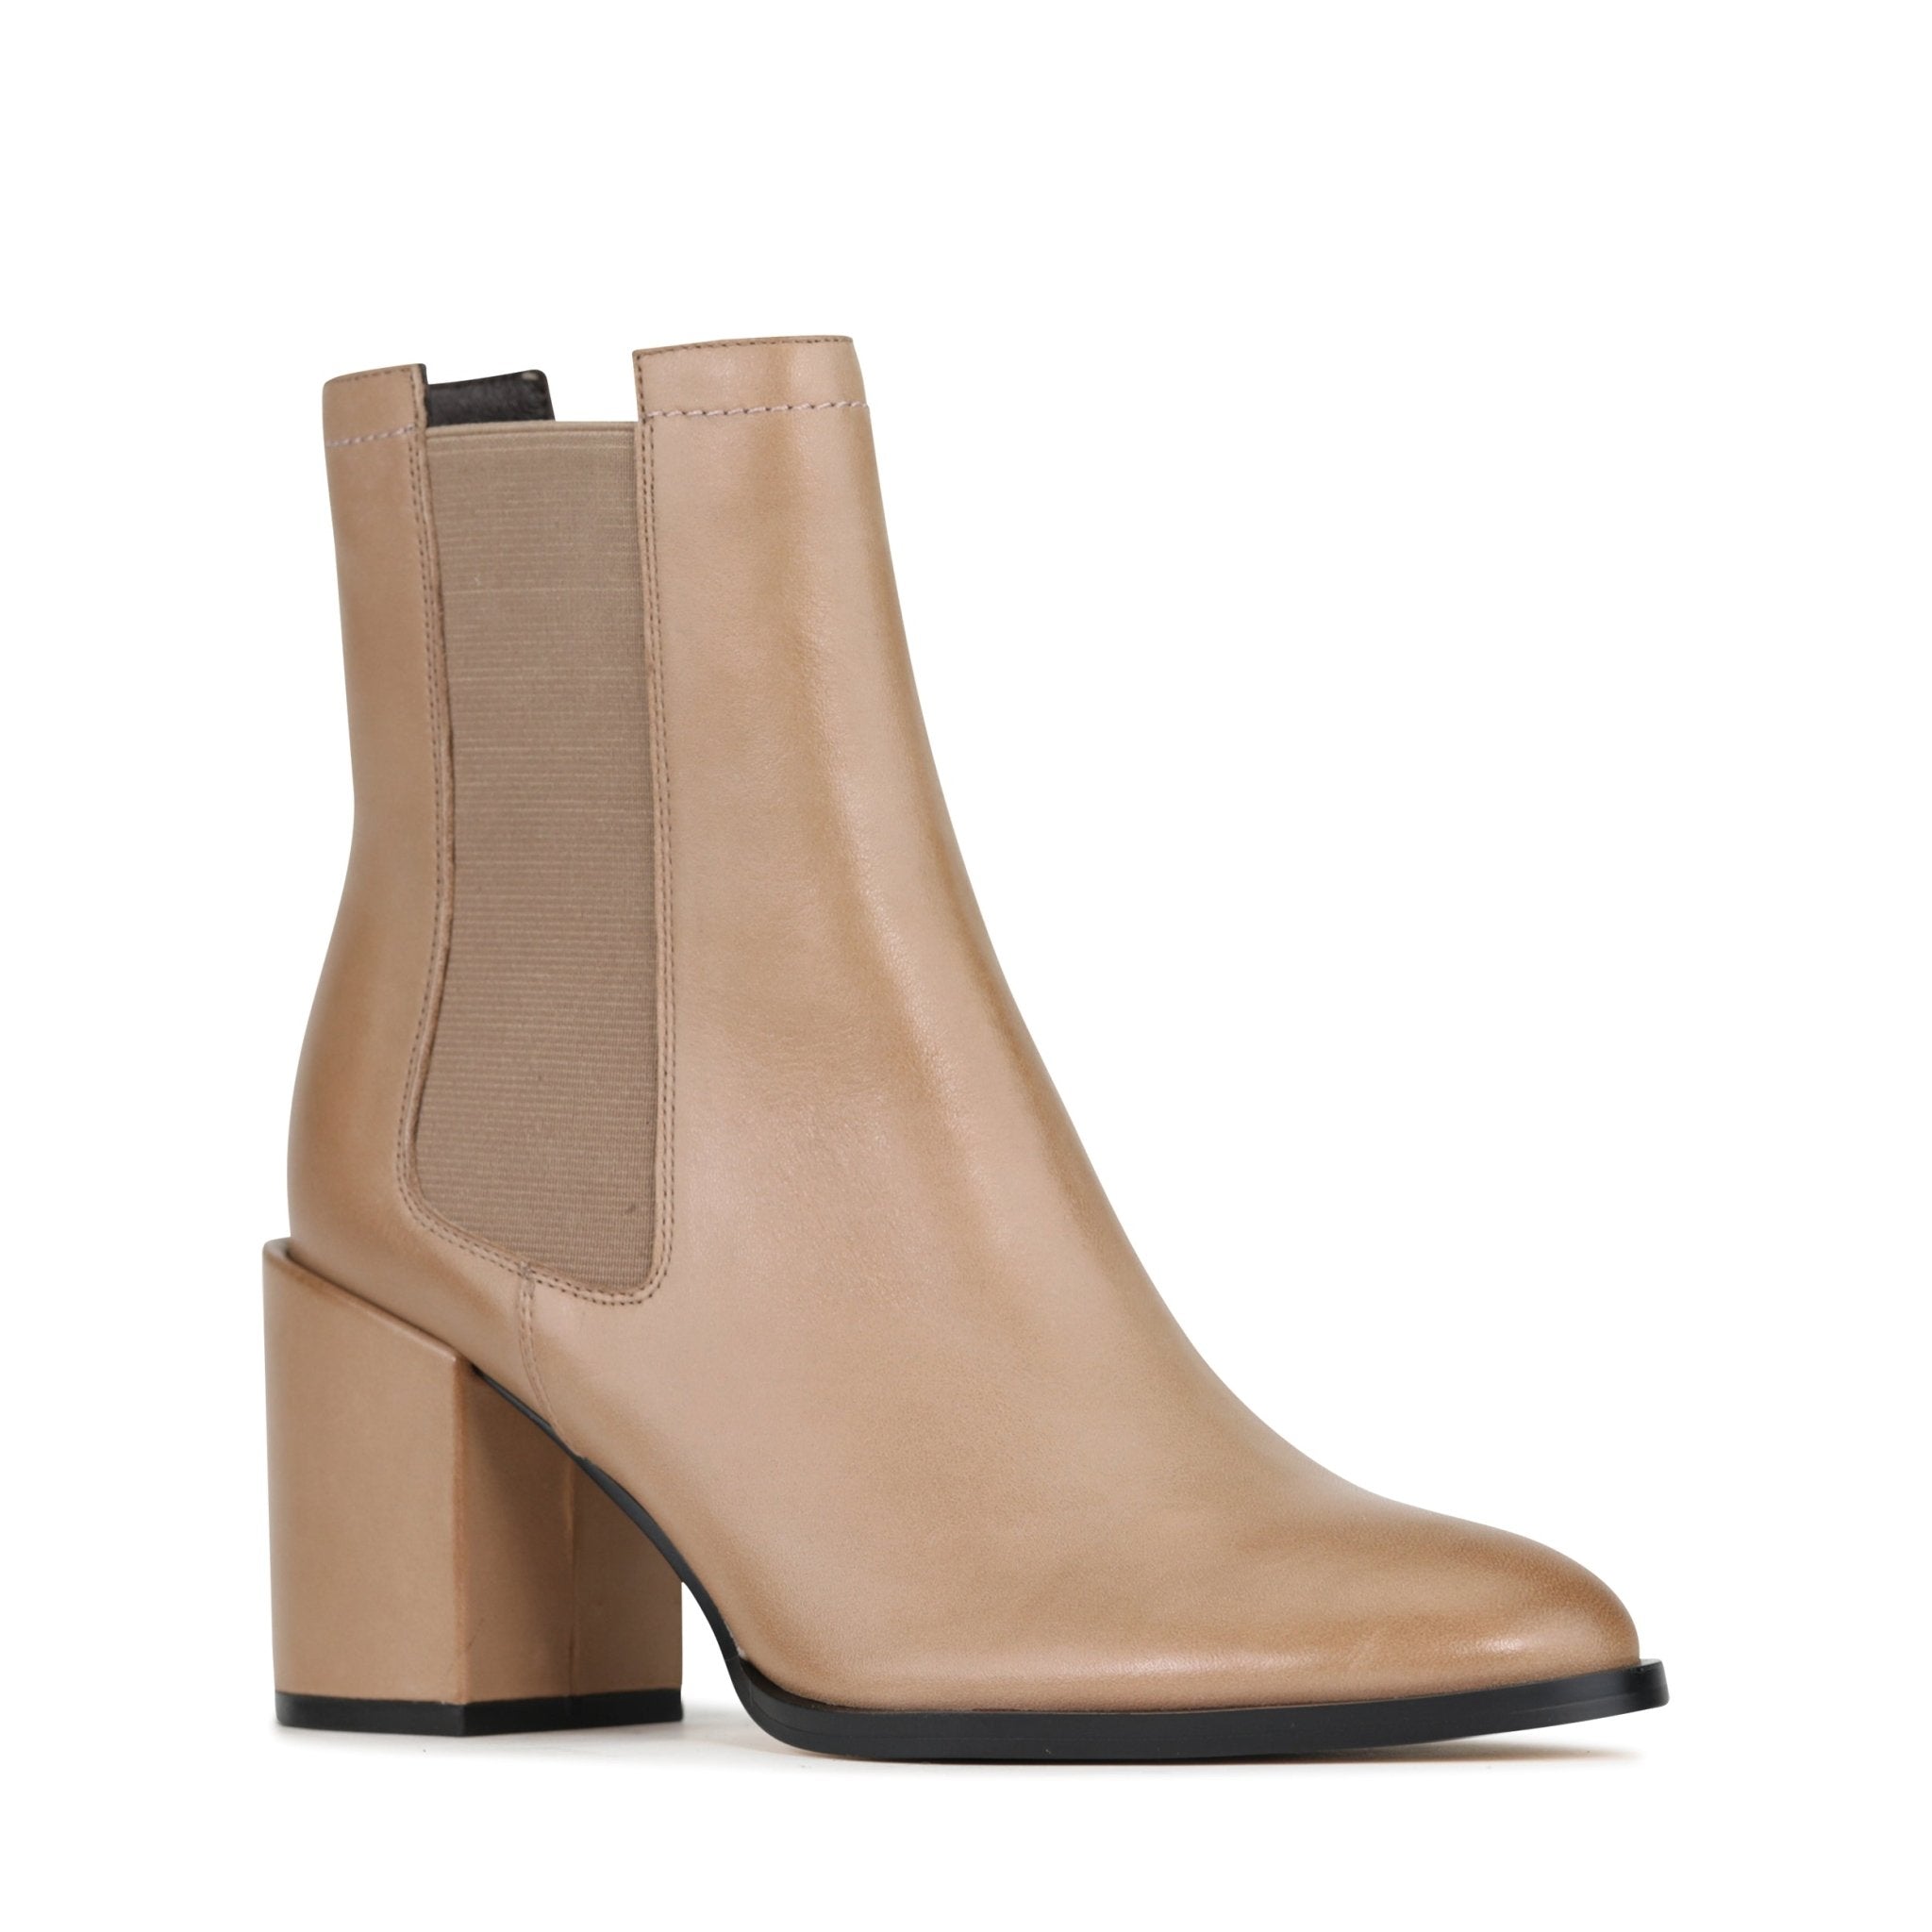 CASTEL - EOS Footwear - Ankle Boots #color_Taupe